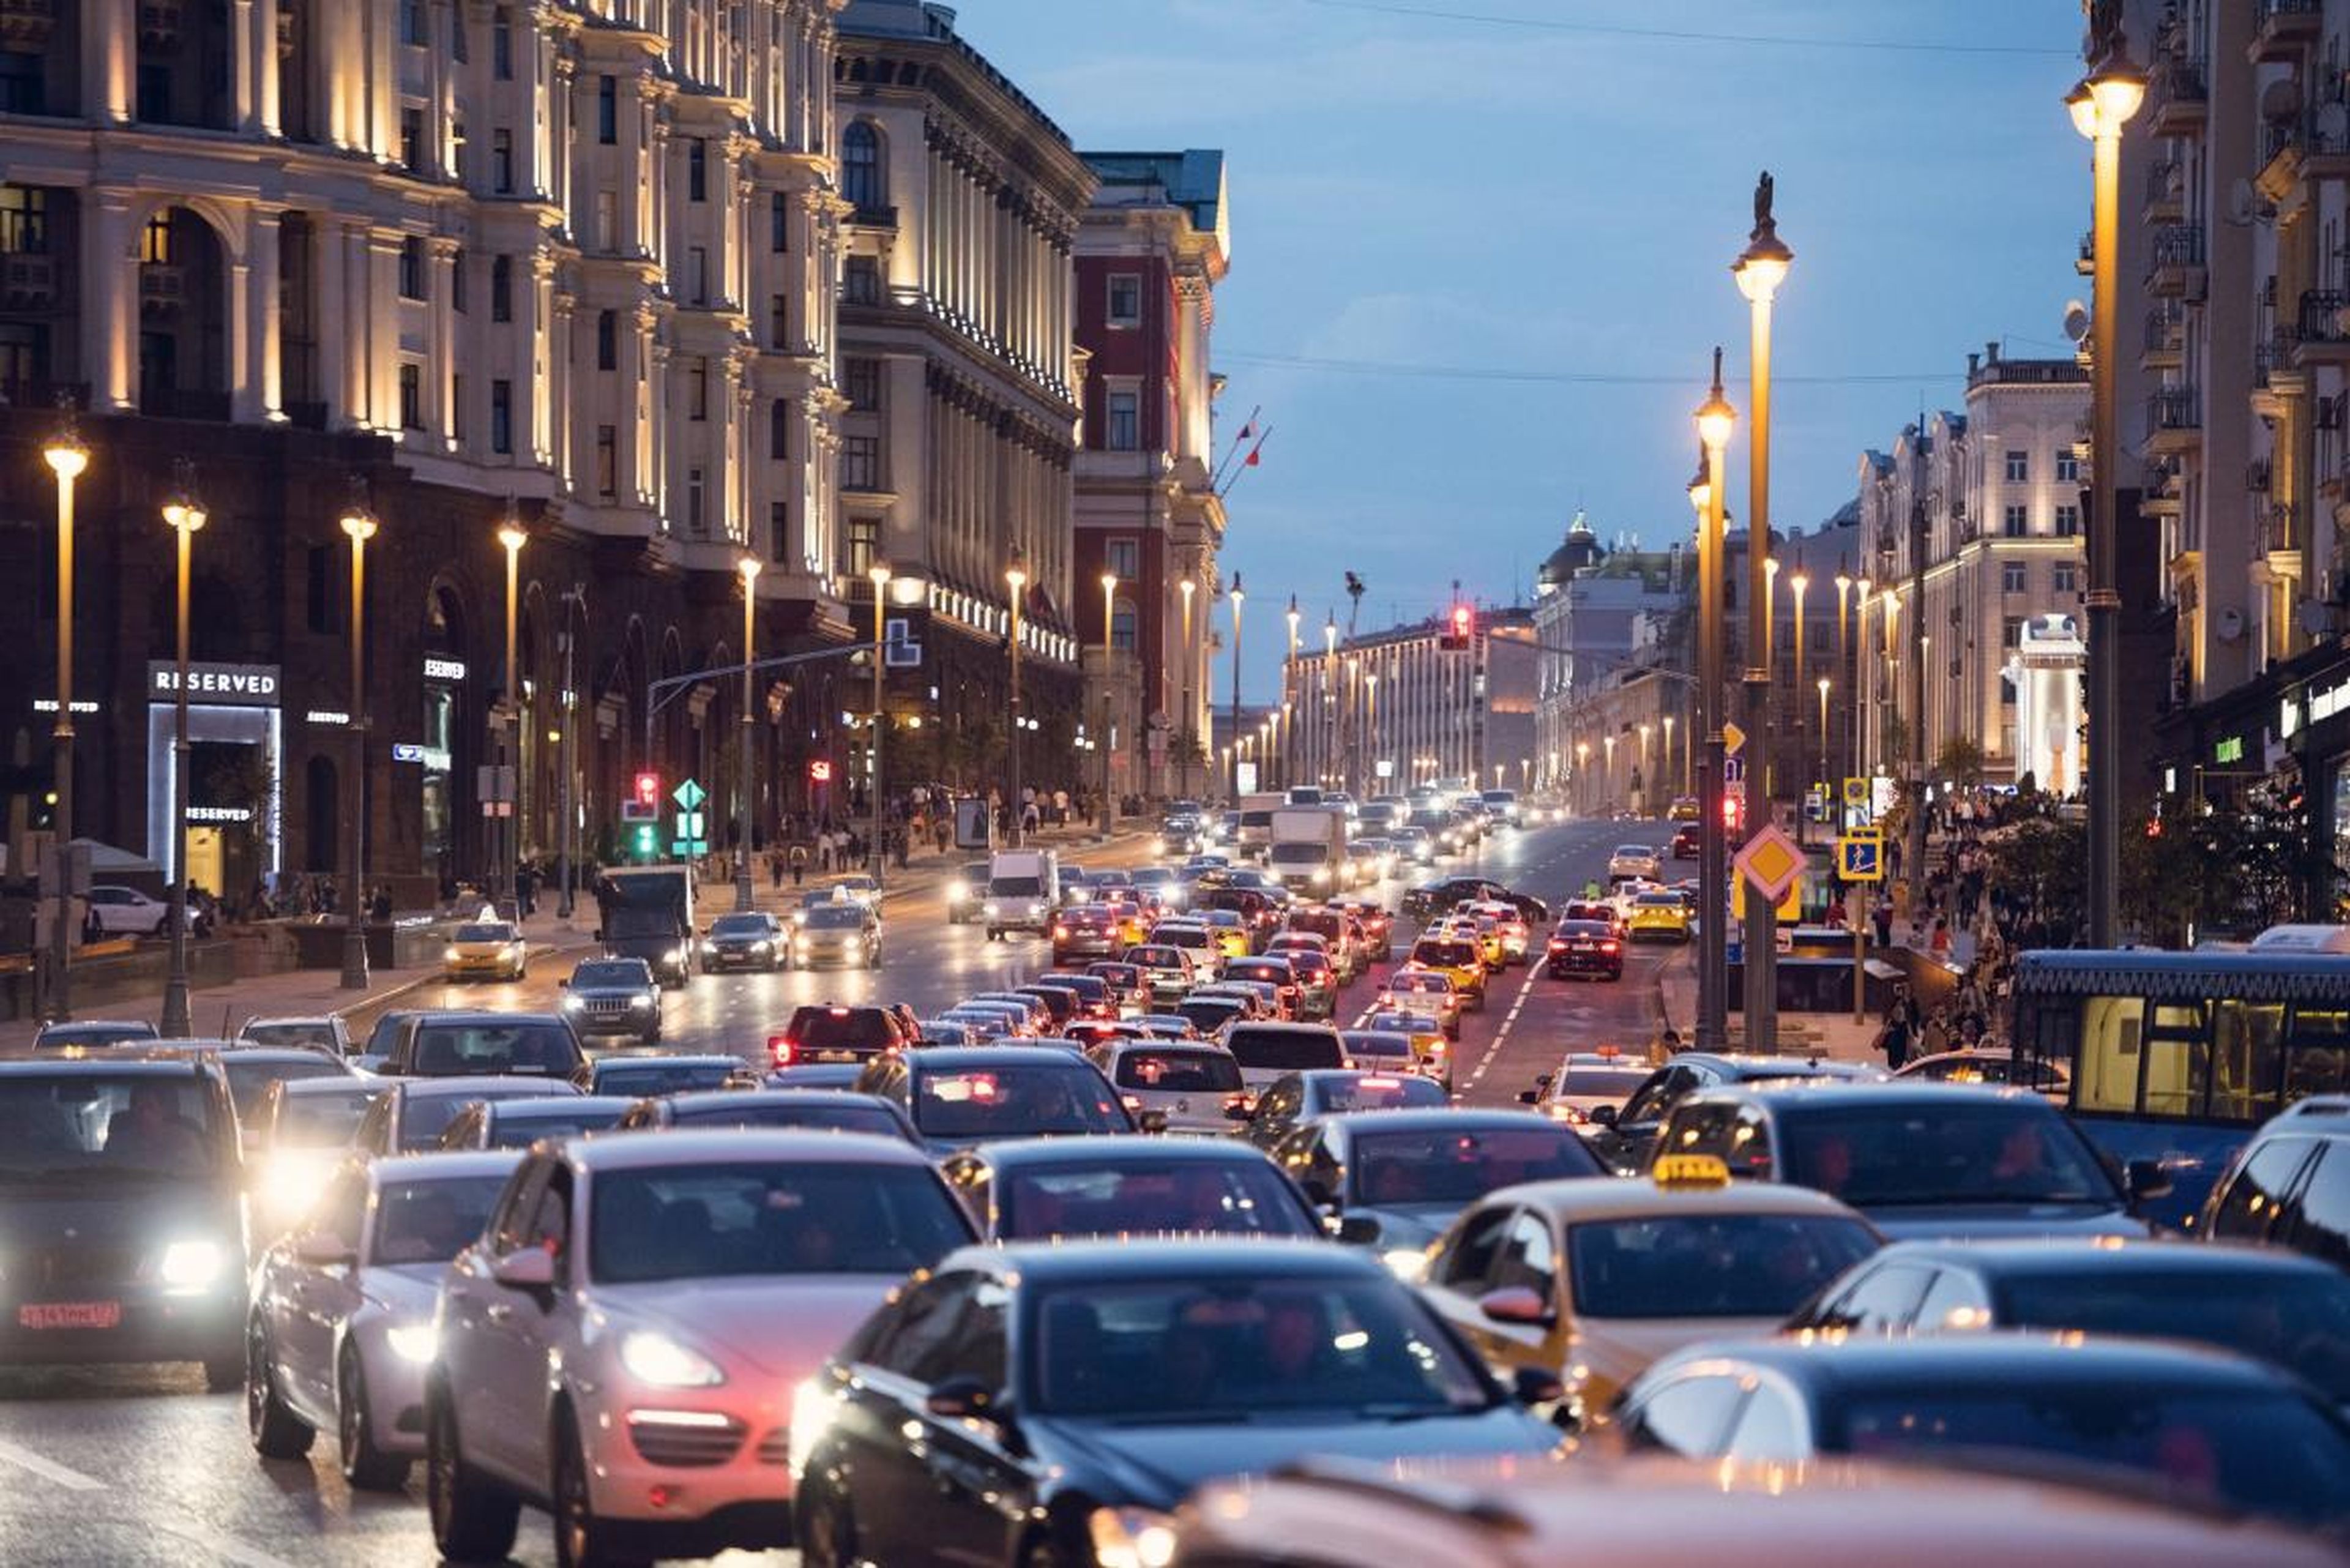 Unfortunately, the city's inhabitants spend an average of 91 hours in congestion every year.